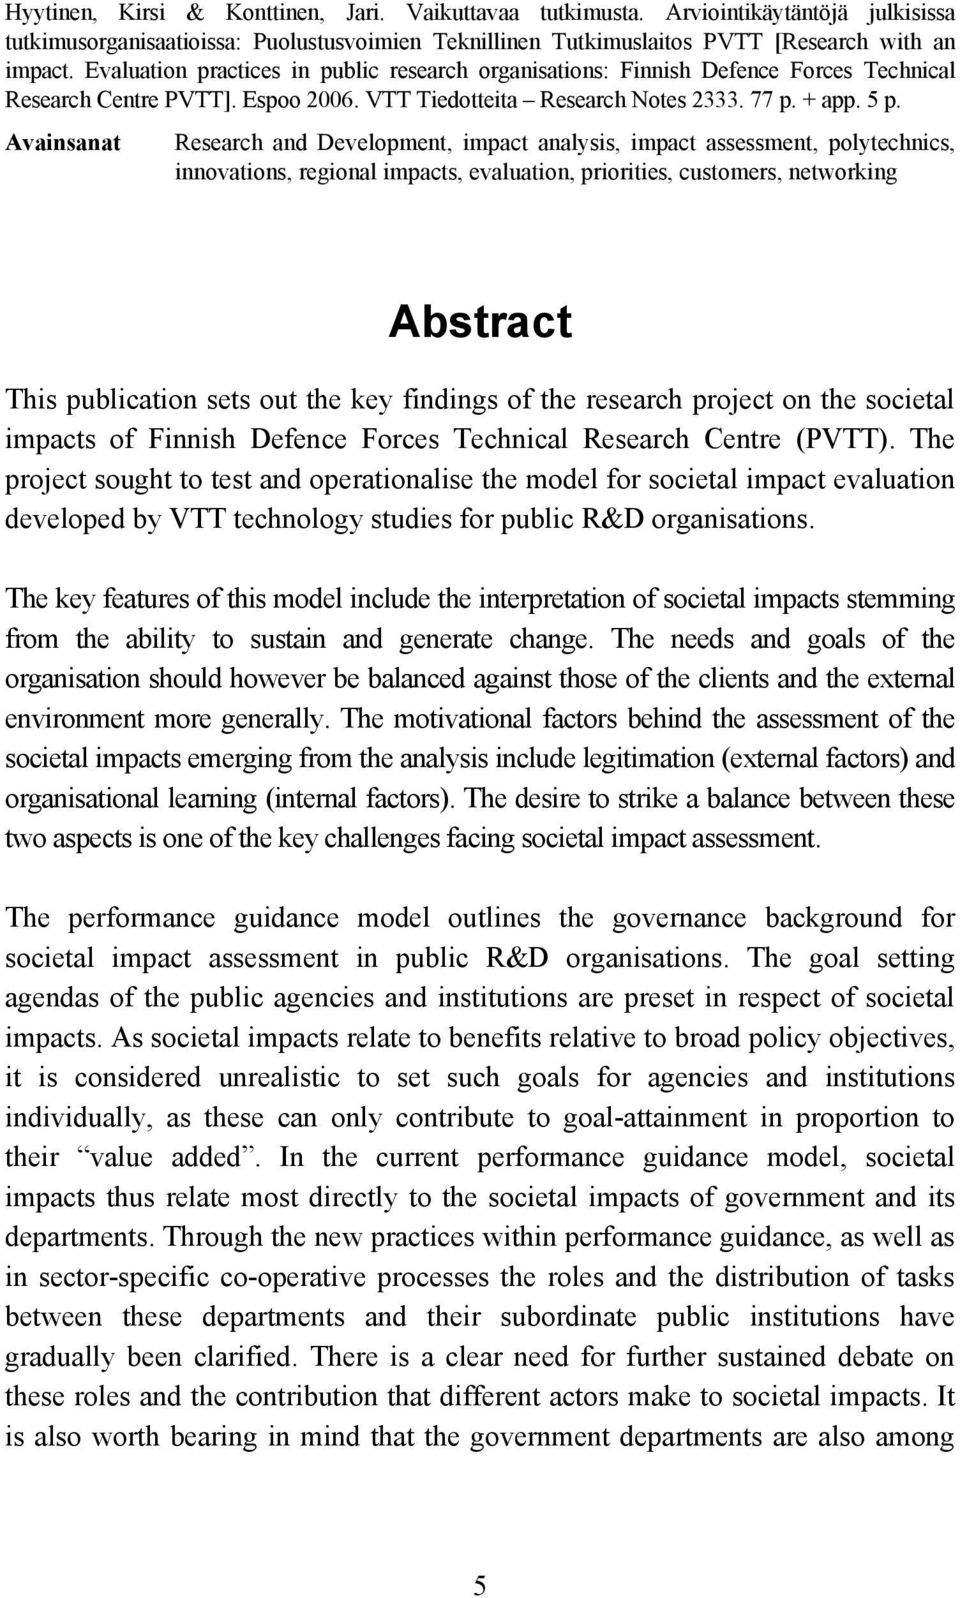 Avainsanat Research and Development, impact analysis, impact assessment, polytechnics, innovations, regional impacts, evaluation, priorities, customers, networking Abstract This publication sets out